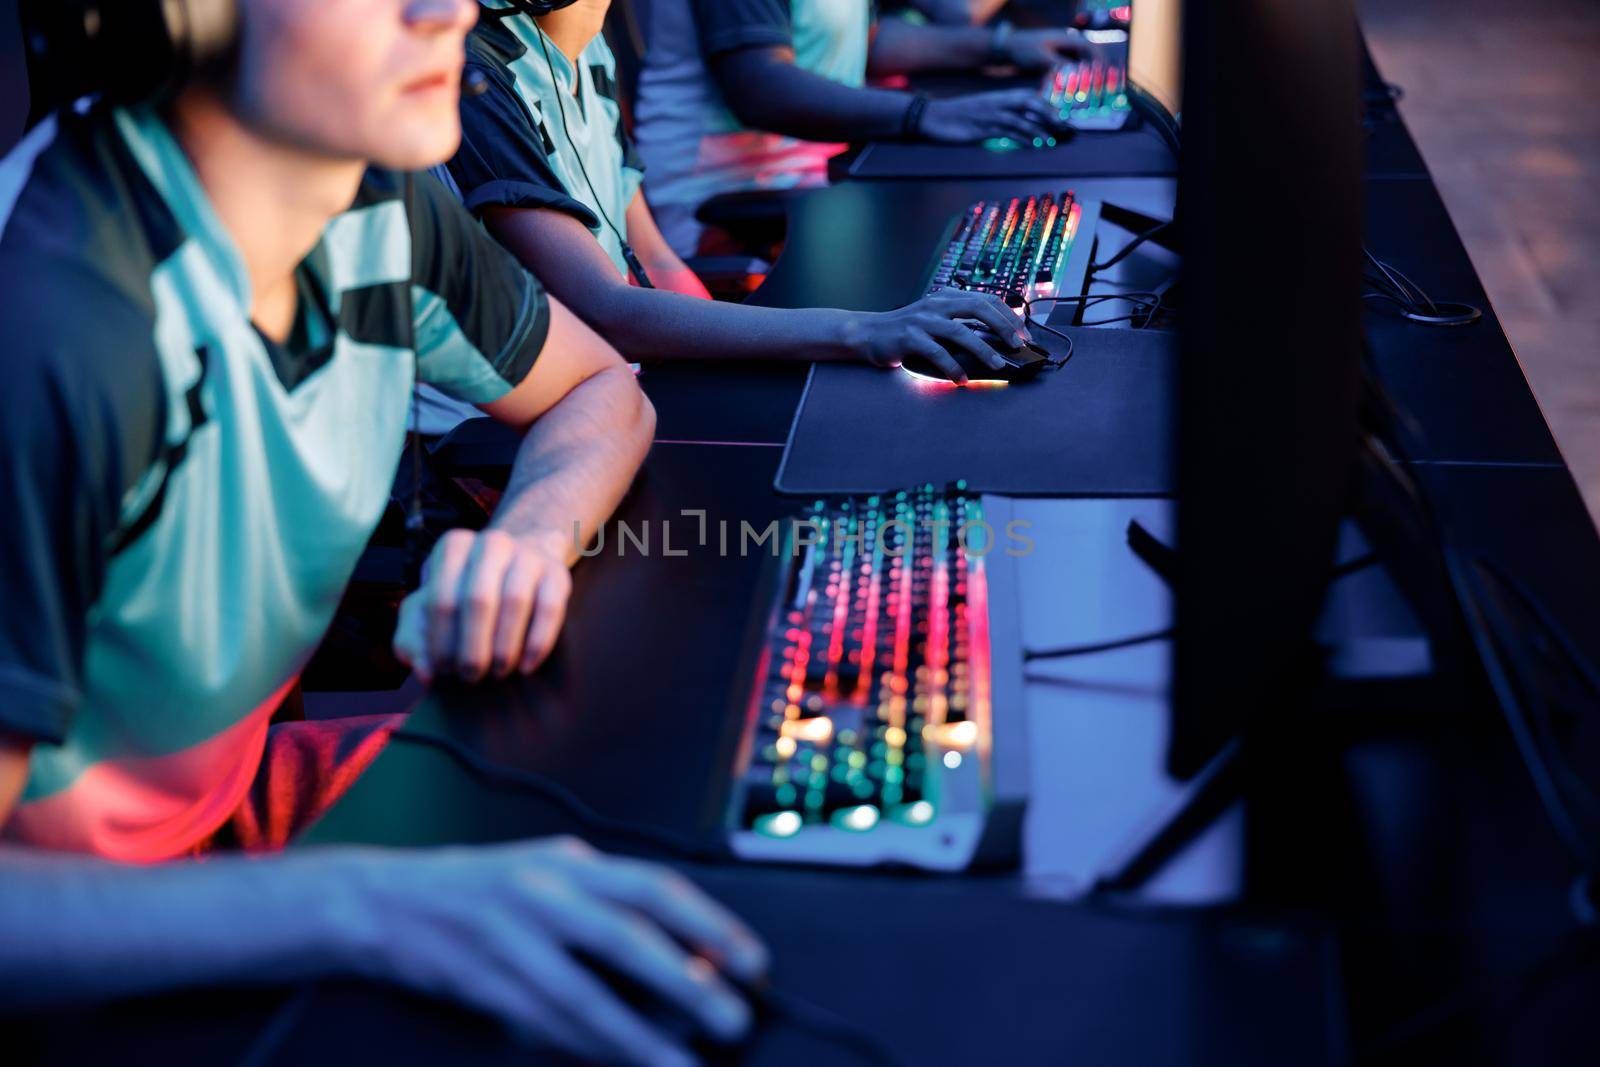 Selective focus on gamers hands using brightly lit keyboards while playing in competitive game in cyber games arena club